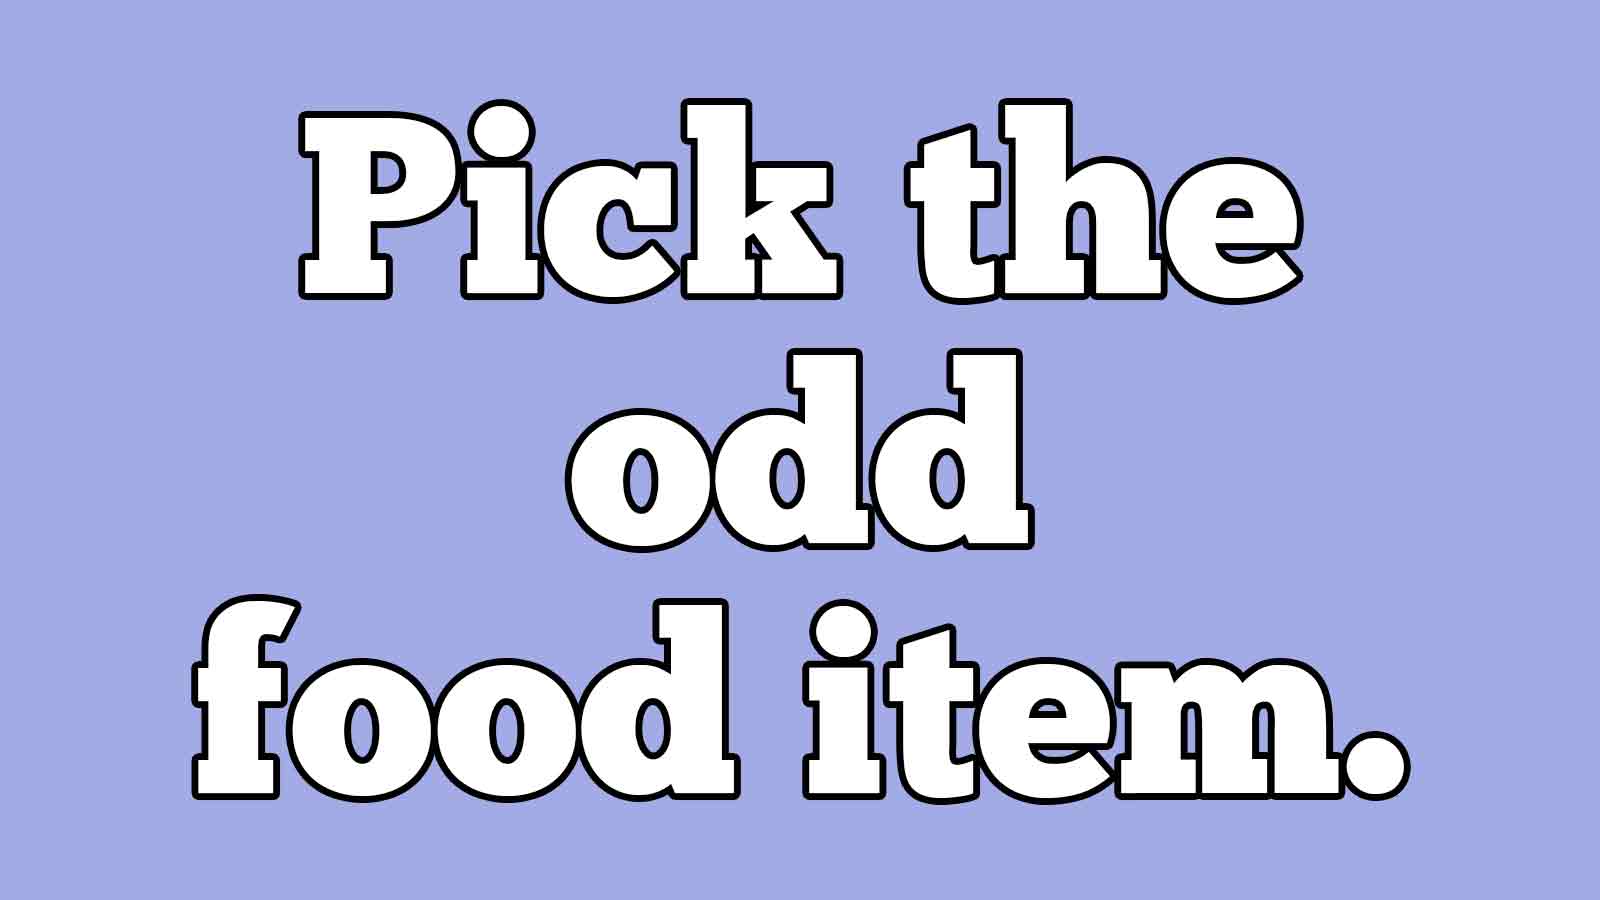 Can You Score 15/15 in This Mildly Infuriating “Odd One Out” Quiz? 433